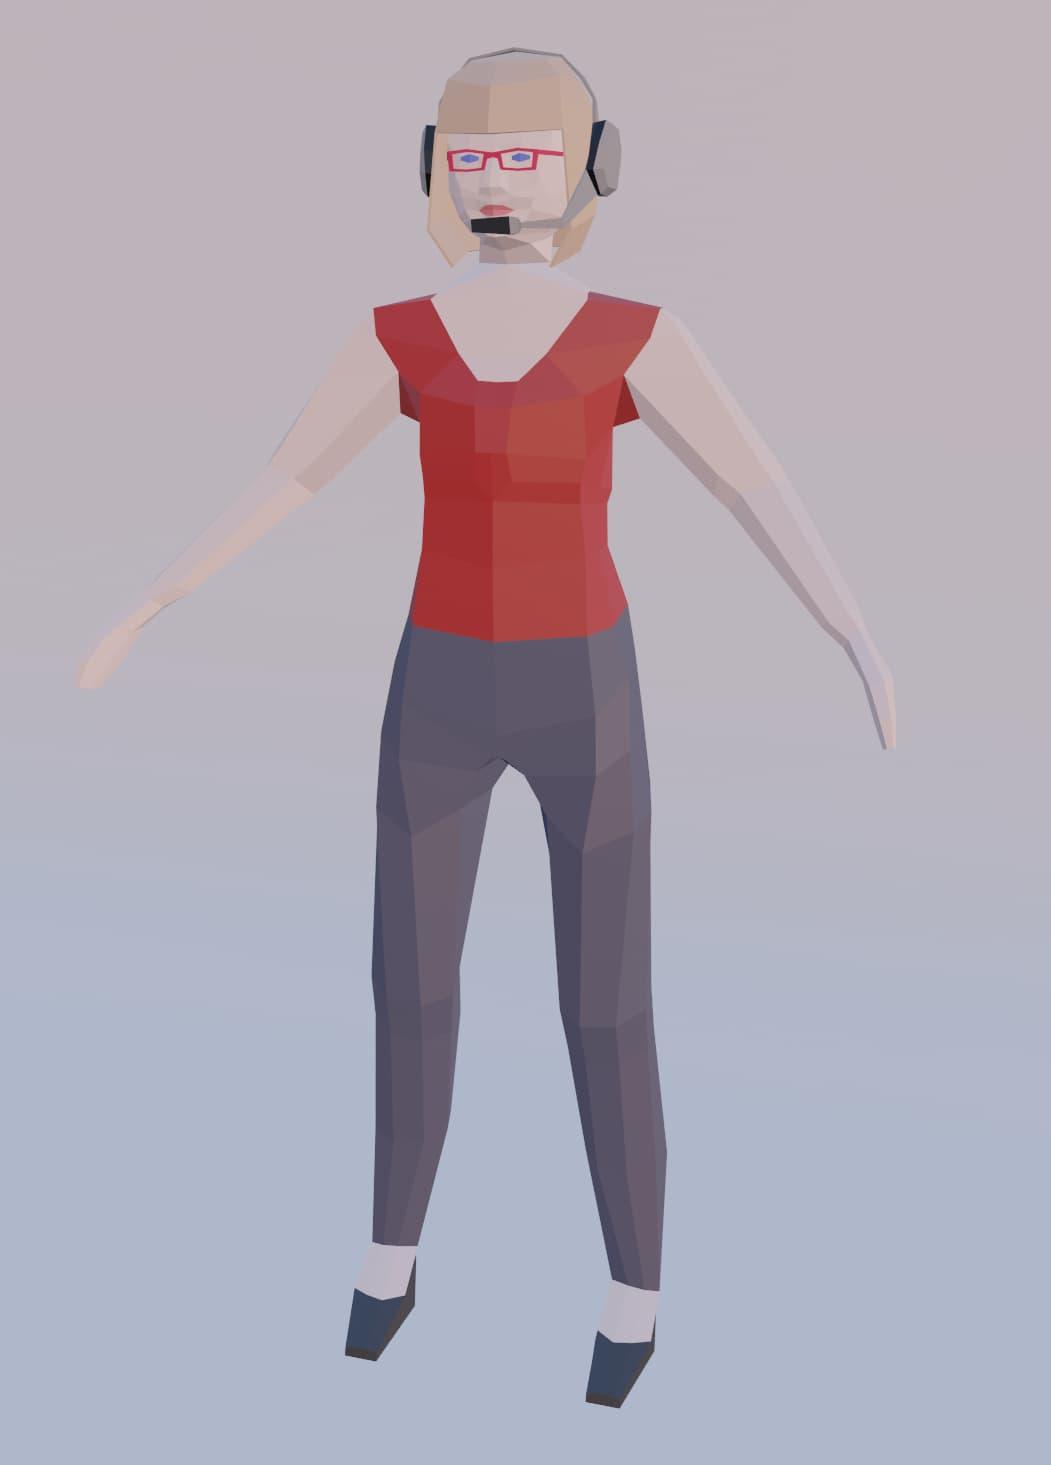 3D model of Proxy - a blonde woman wearing a red shirt, blue pants, red glasses, and a headset, making an A pose